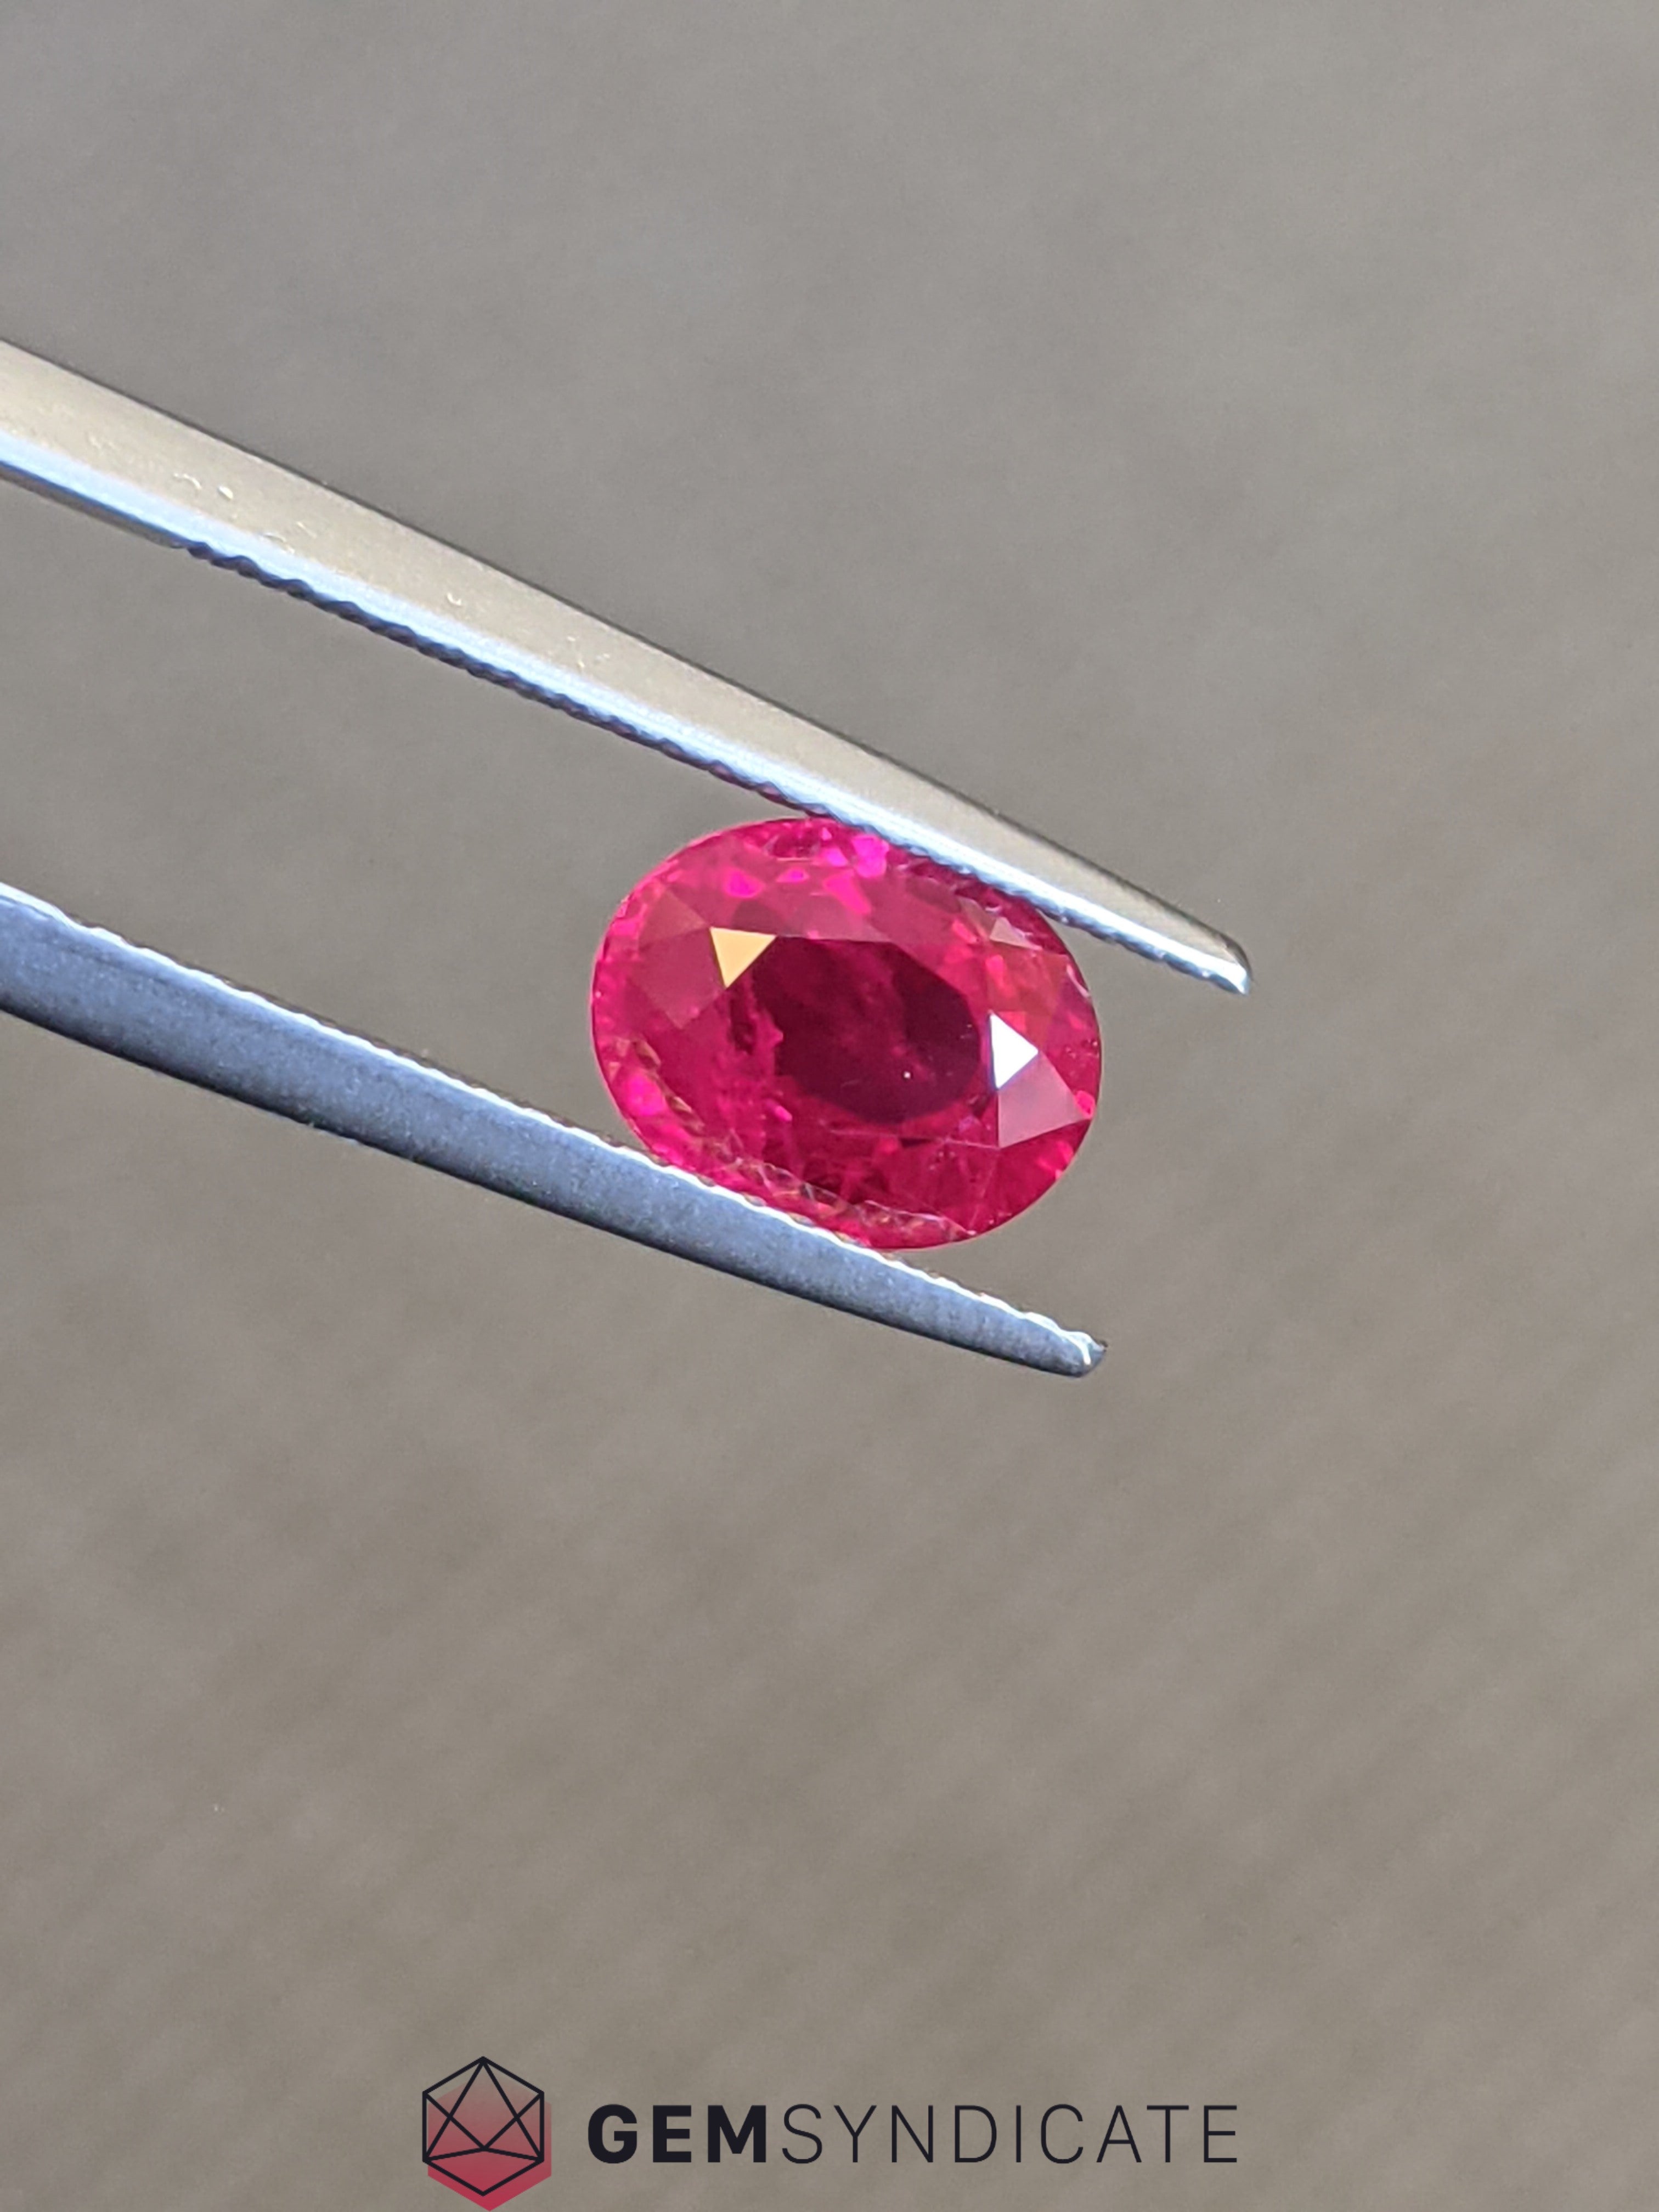 Fantastic Oval Ruby 2.02ct